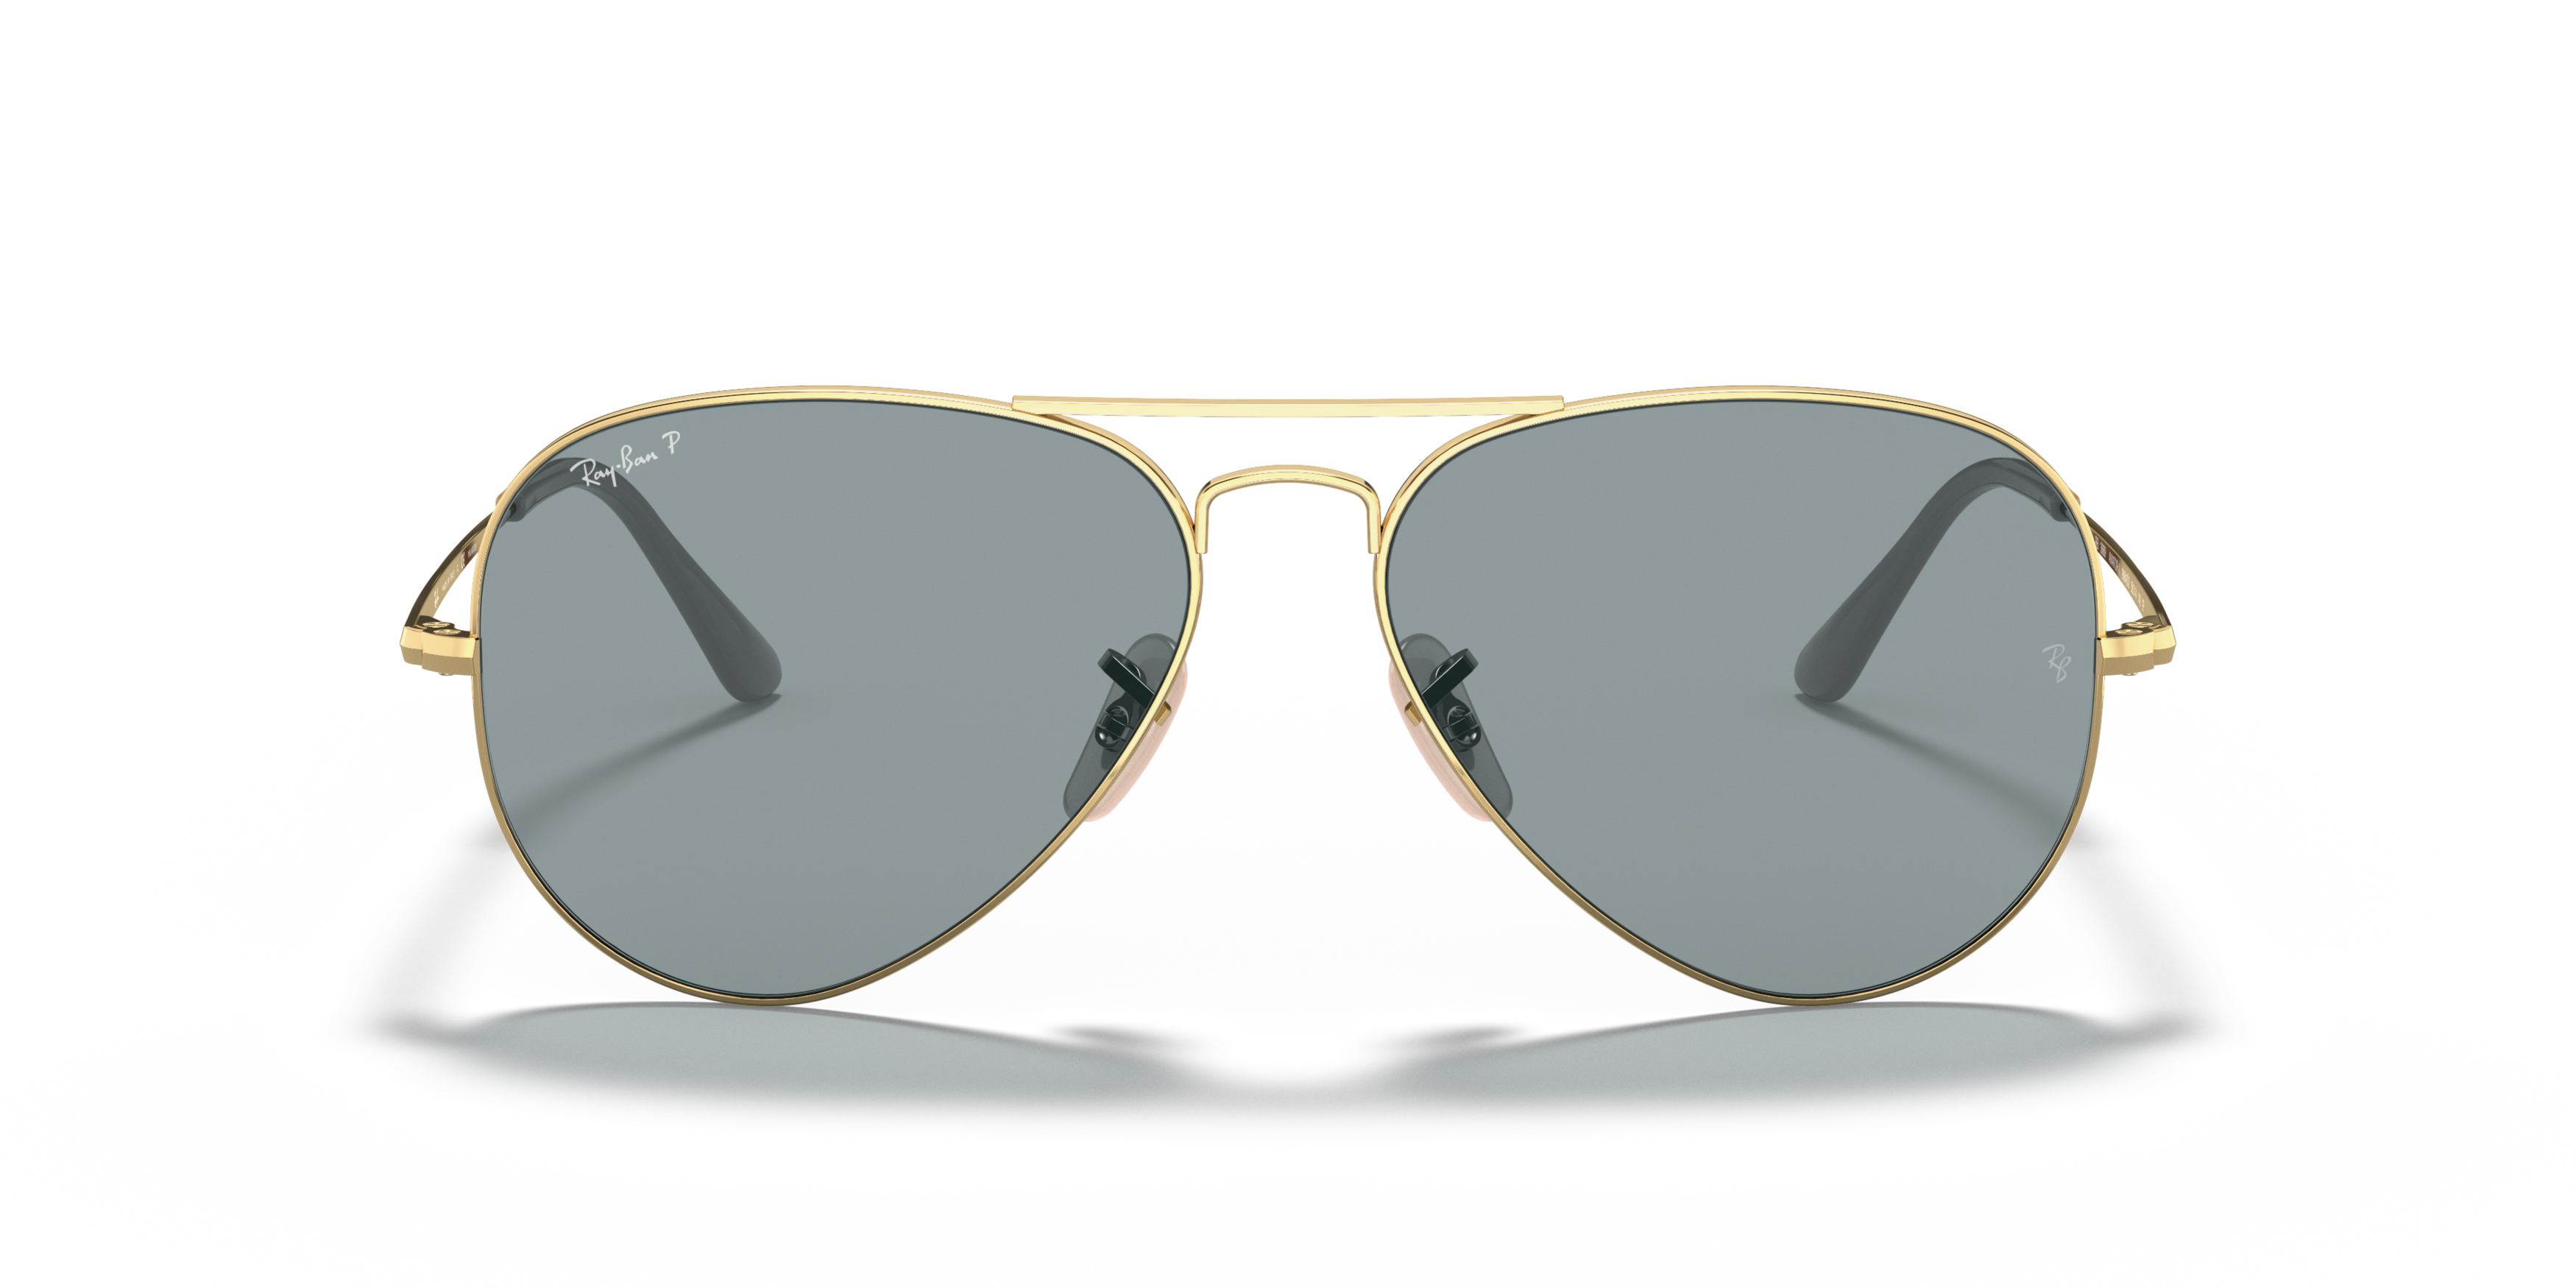 [products.image.front] Ray-Ban Aviator Metal II RB3689 9064S2